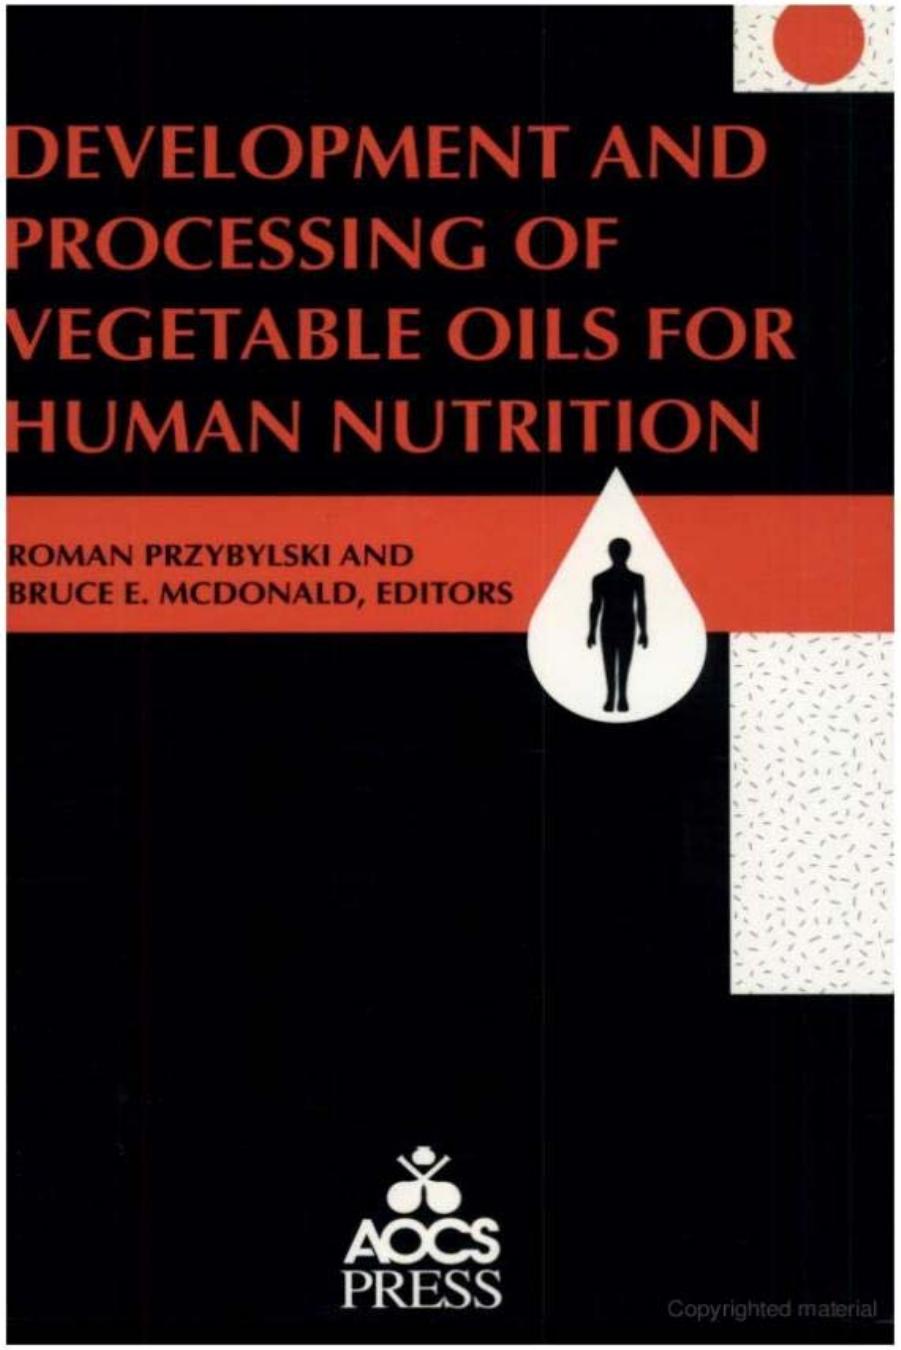 Development and Processing of Vegetable Oils for Human Nutrition